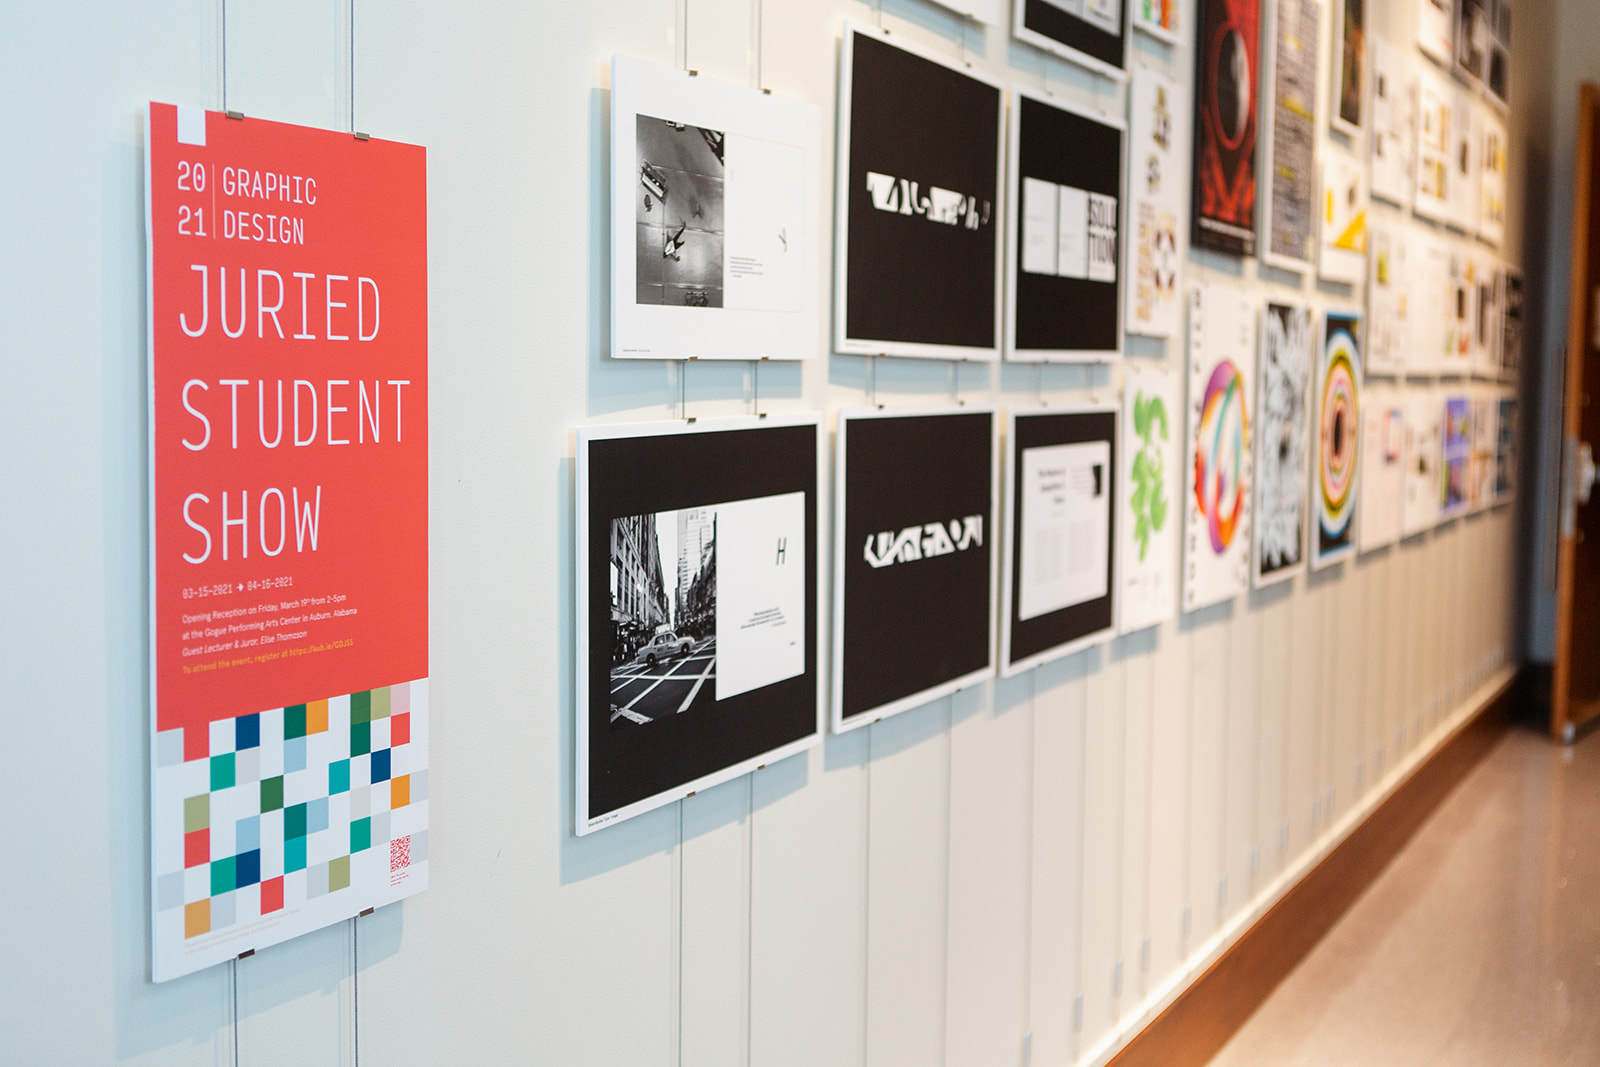 A wall of graphic design projects.